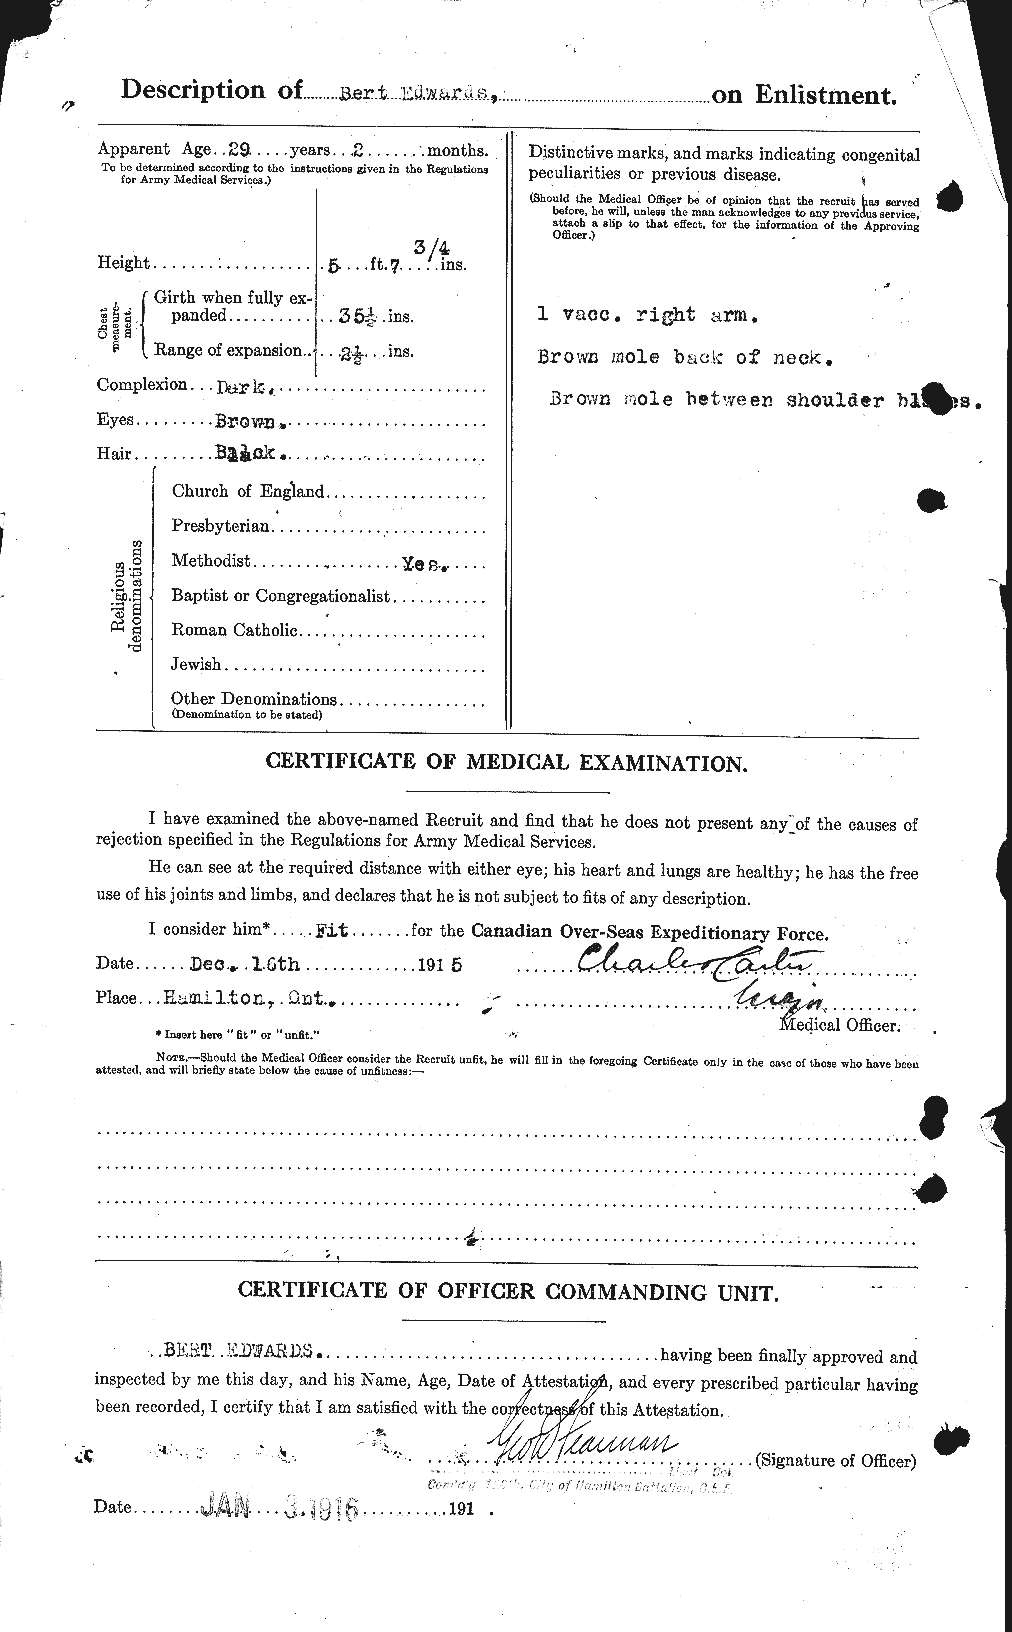 Personnel Records of the First World War - CEF 313148b